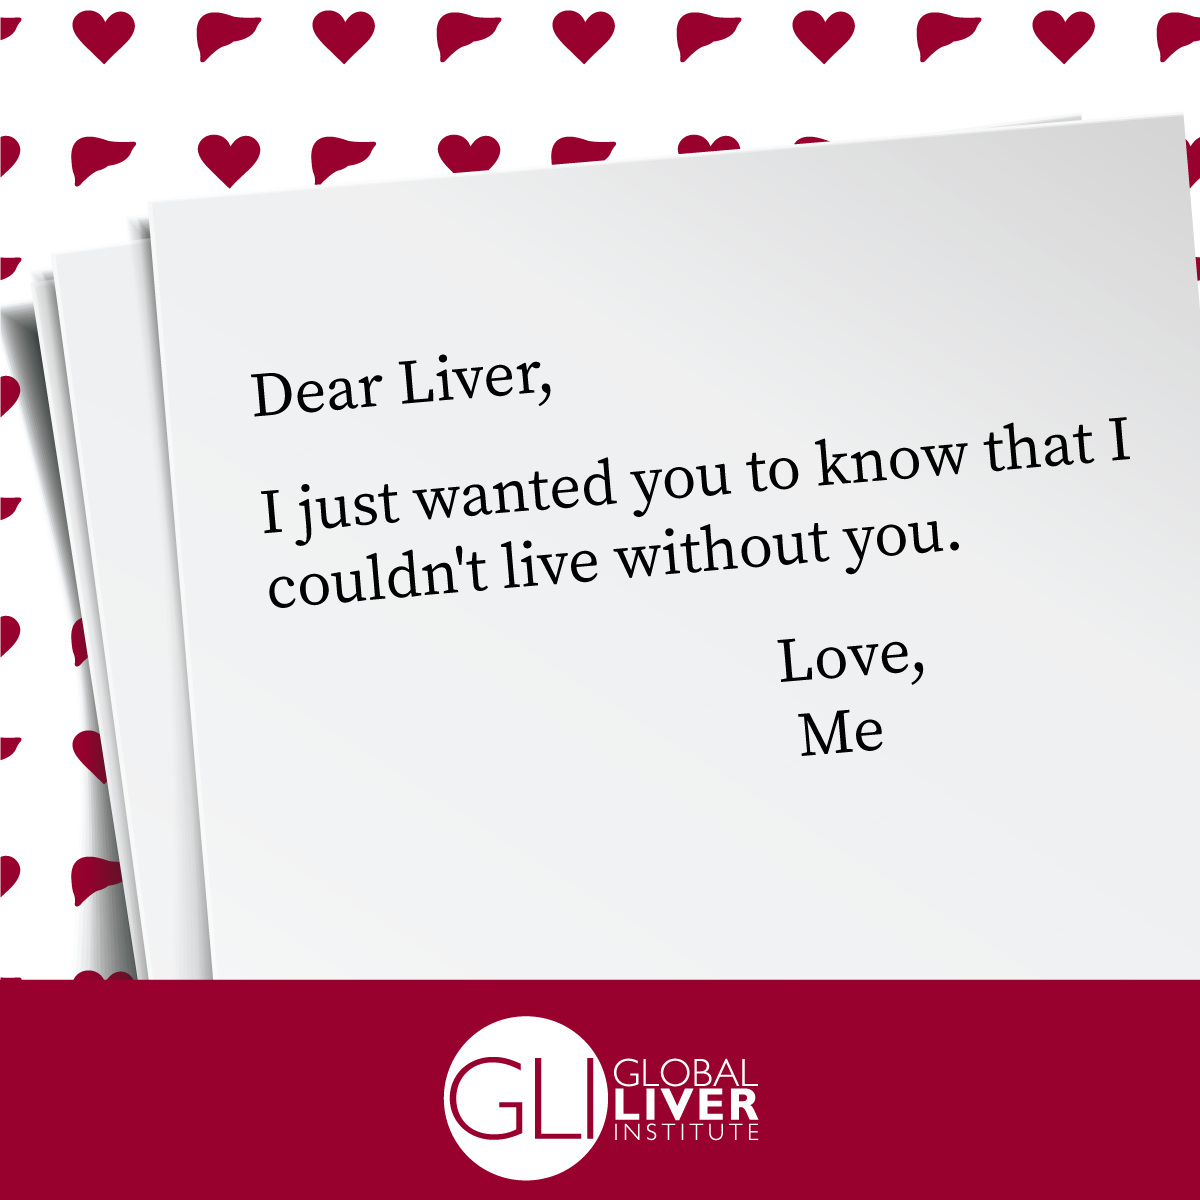 love-letter-to-liver11.png